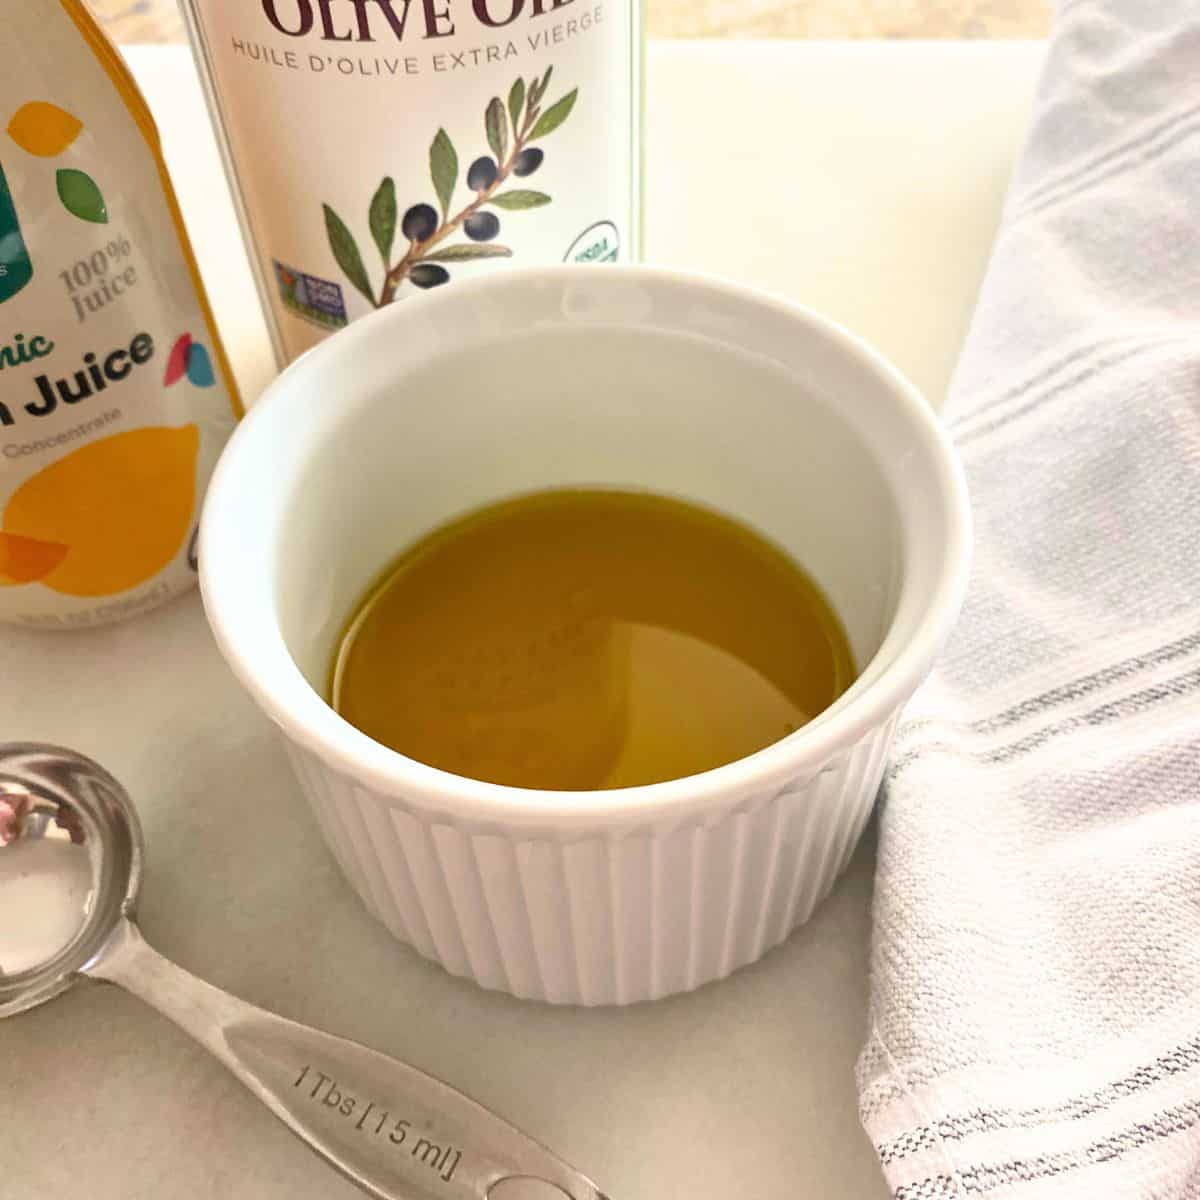 A mixture of lemon and olive oil in a white ramekin for salad dressing